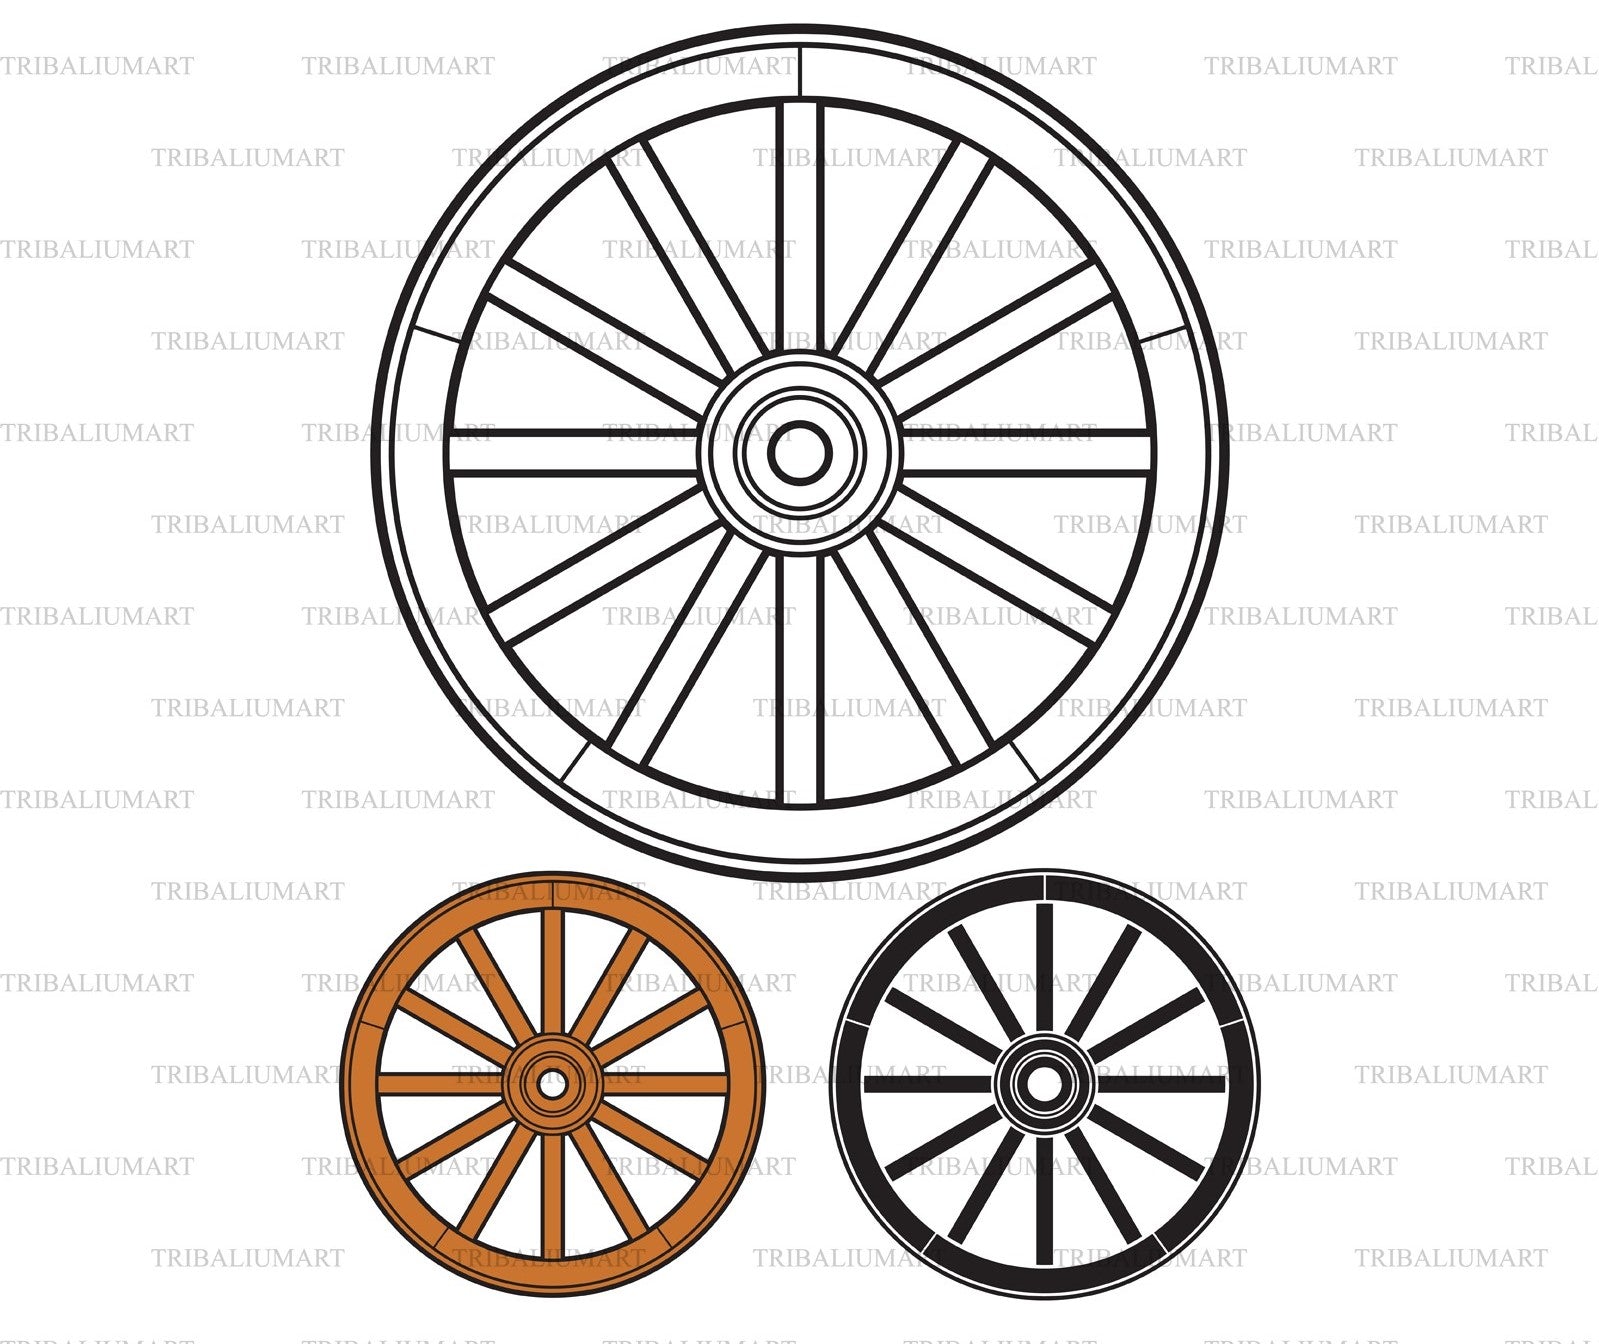 old wheel clipart